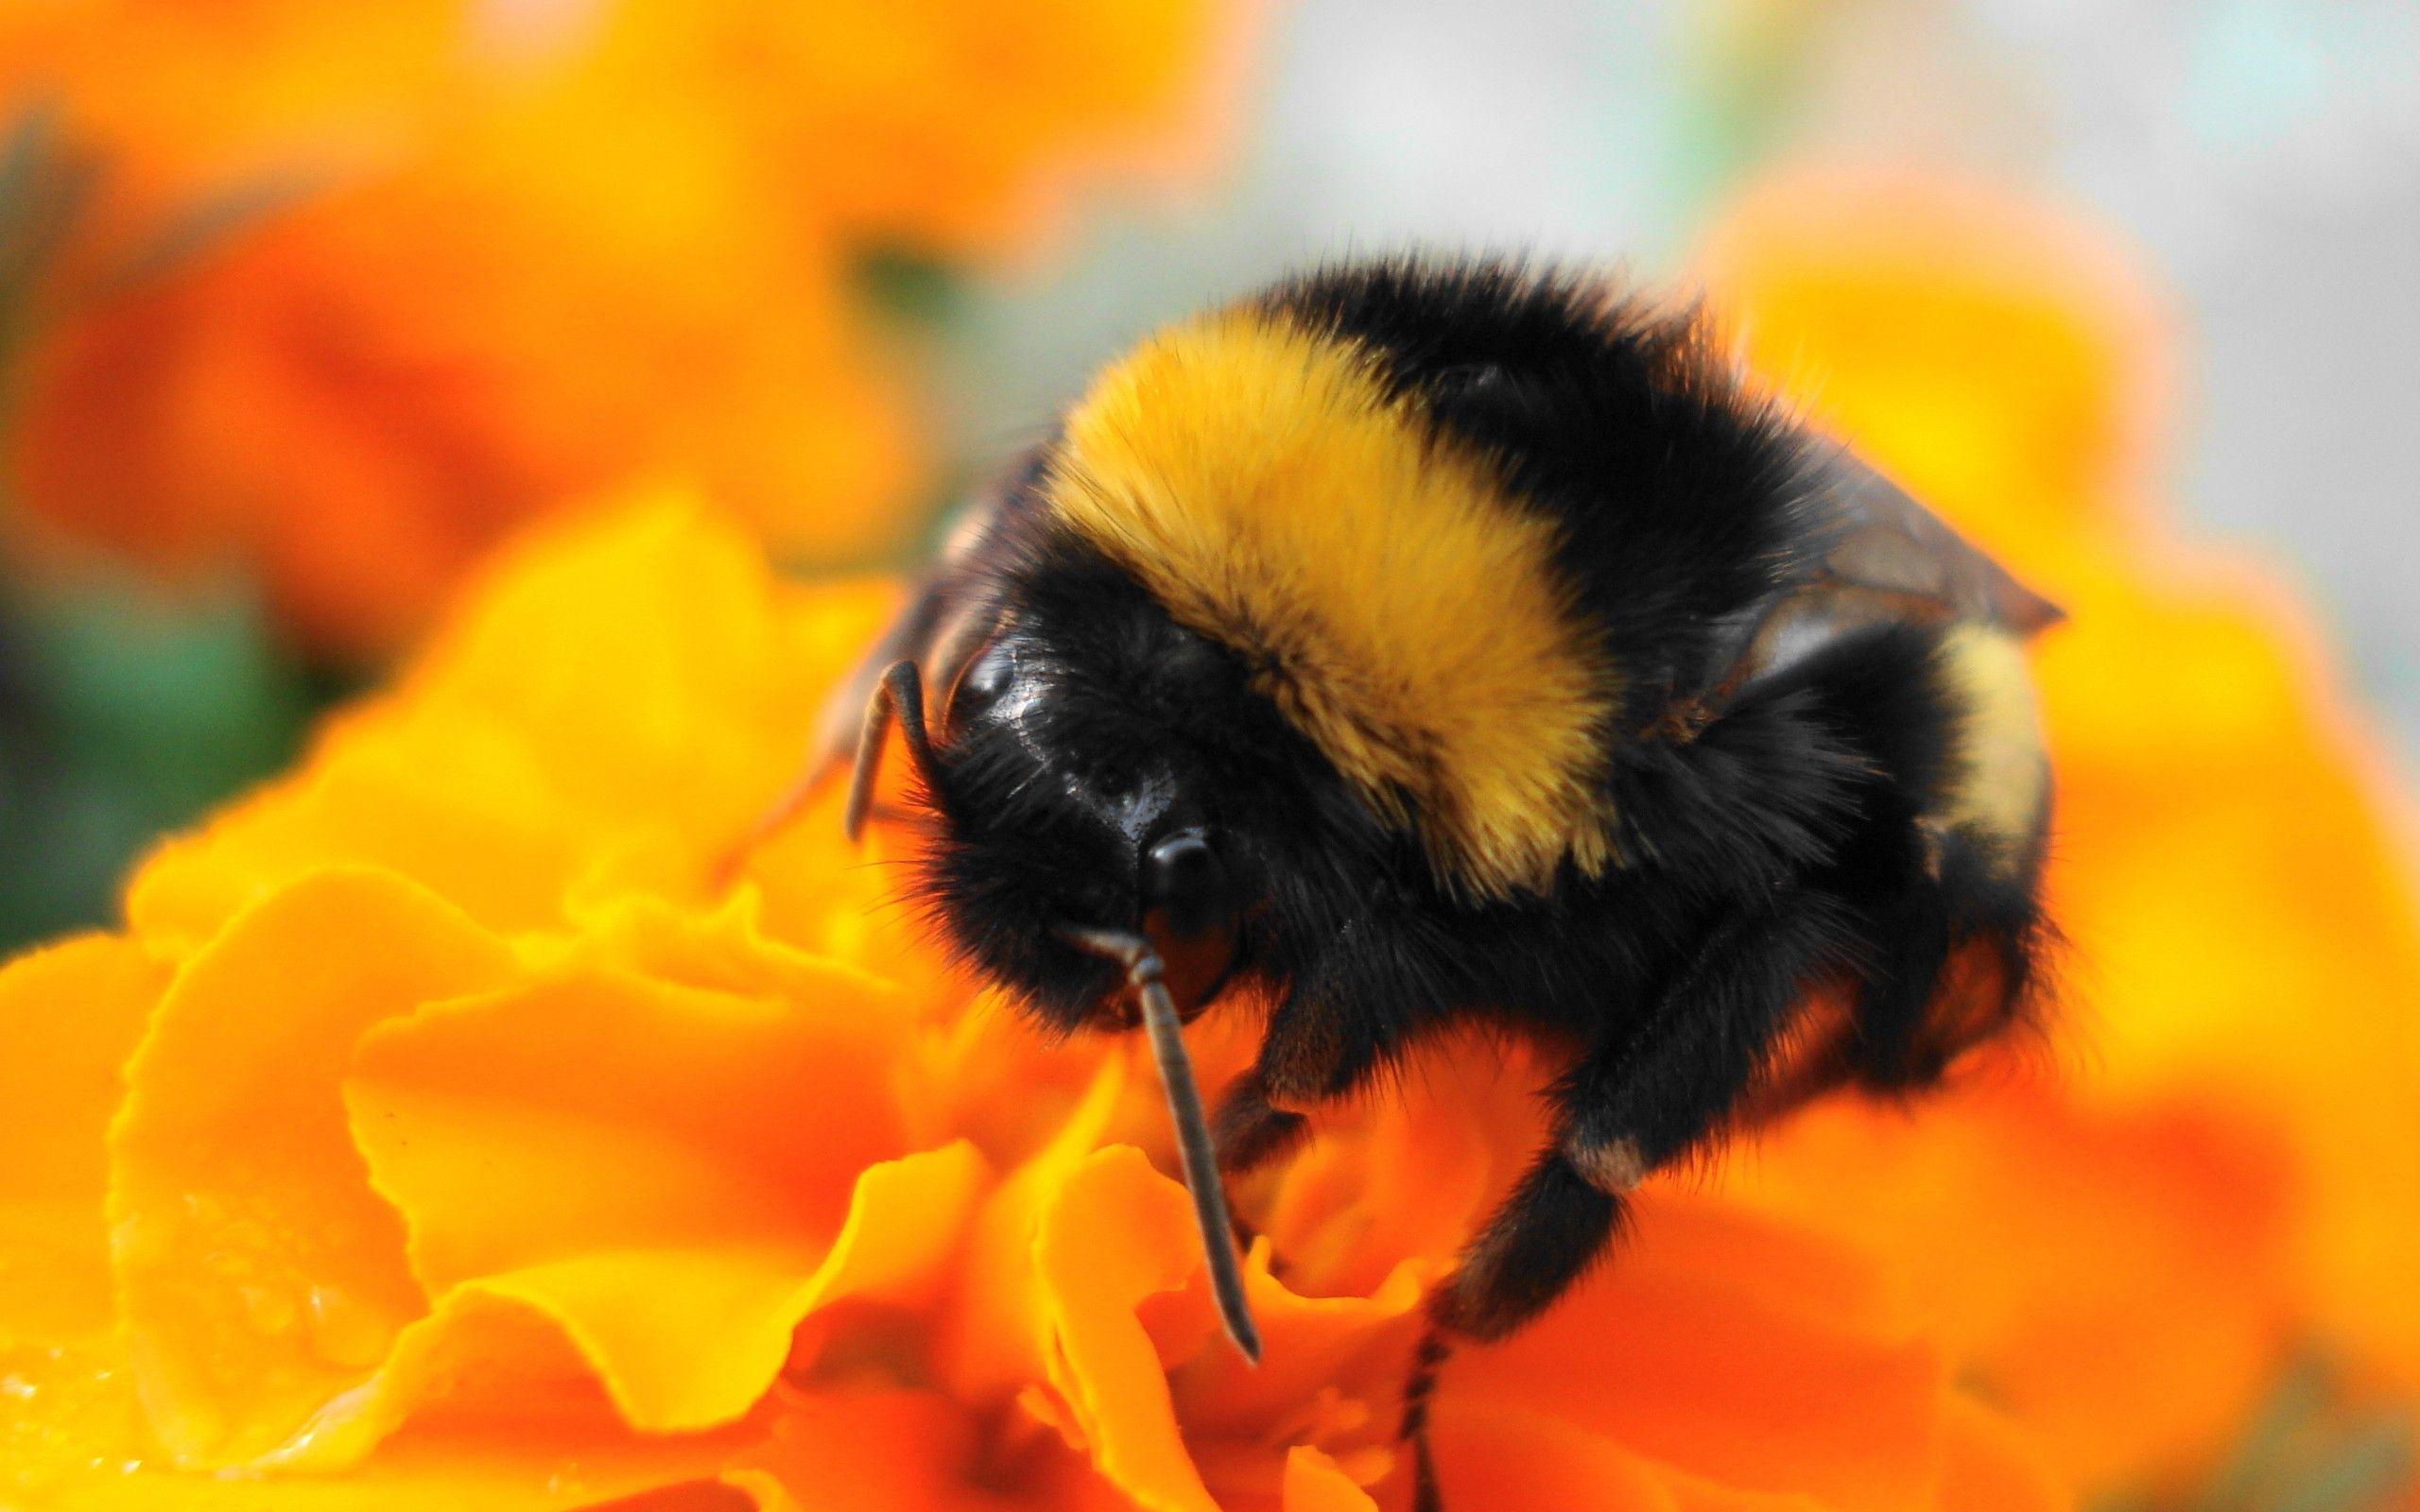 Download the Harvesting Bumble Bee Wallpaper, Harvesting Bumble Bee